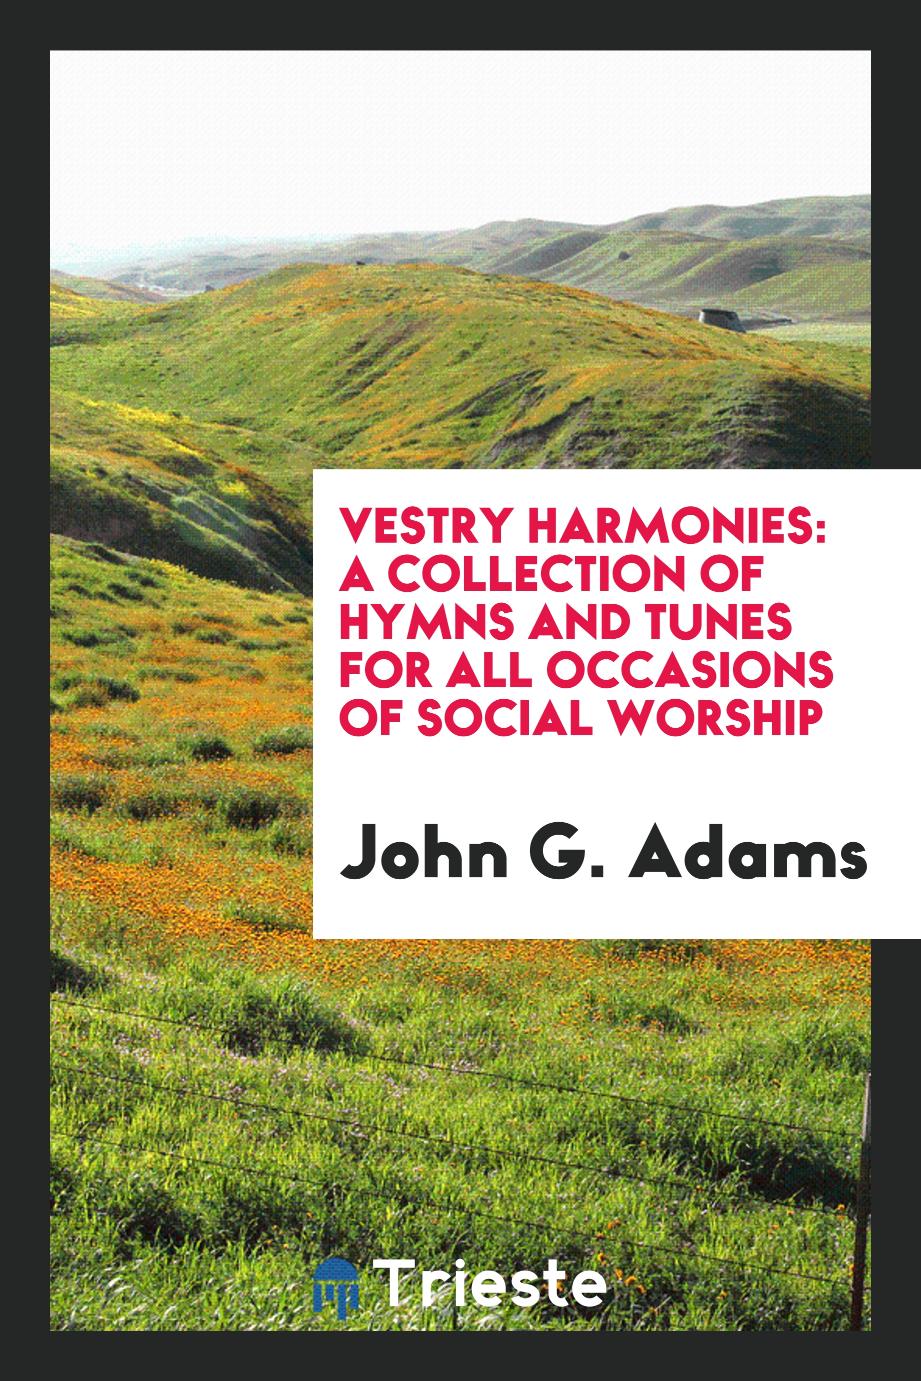 Vestry Harmonies: A Collection of Hymns and Tunes for All Occasions of Social Worship